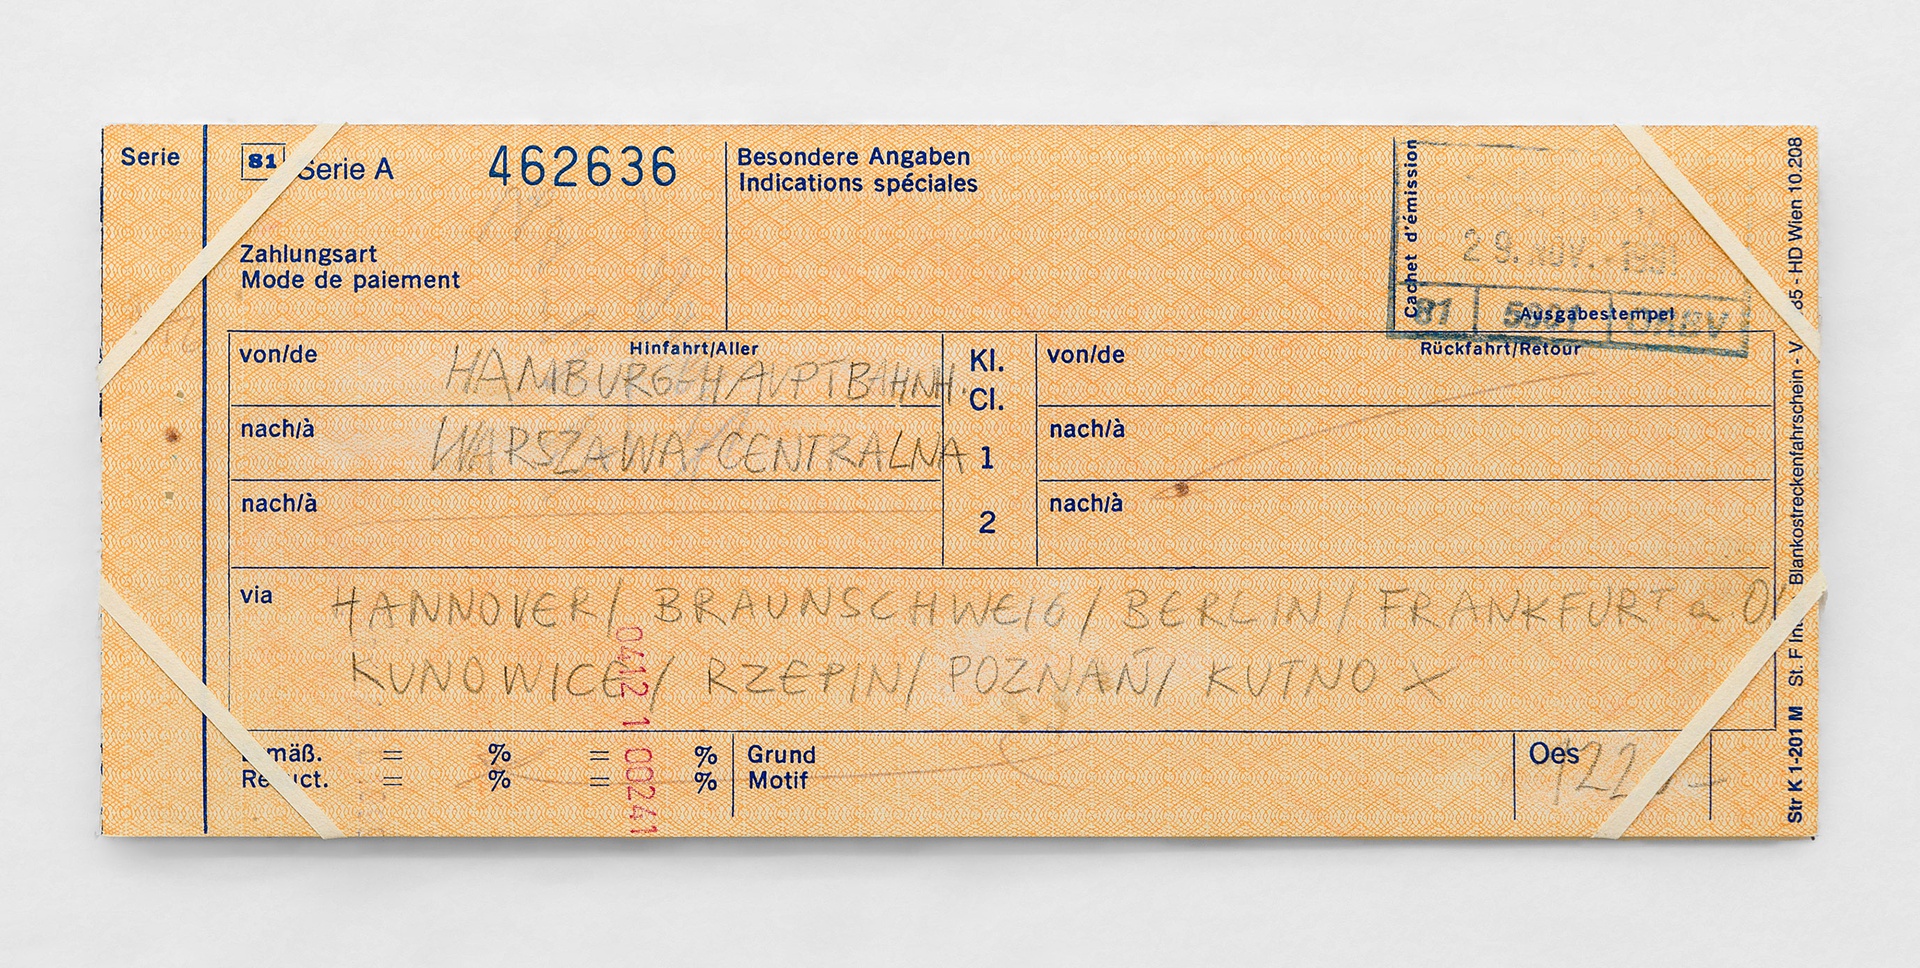 Ariane Mueller, Illegal Travel Documents (Hamburg – Warsaw), 1990 – 1993eraser and pencil and on travel document, PVC foil, paper strips8,3 x 20 cm